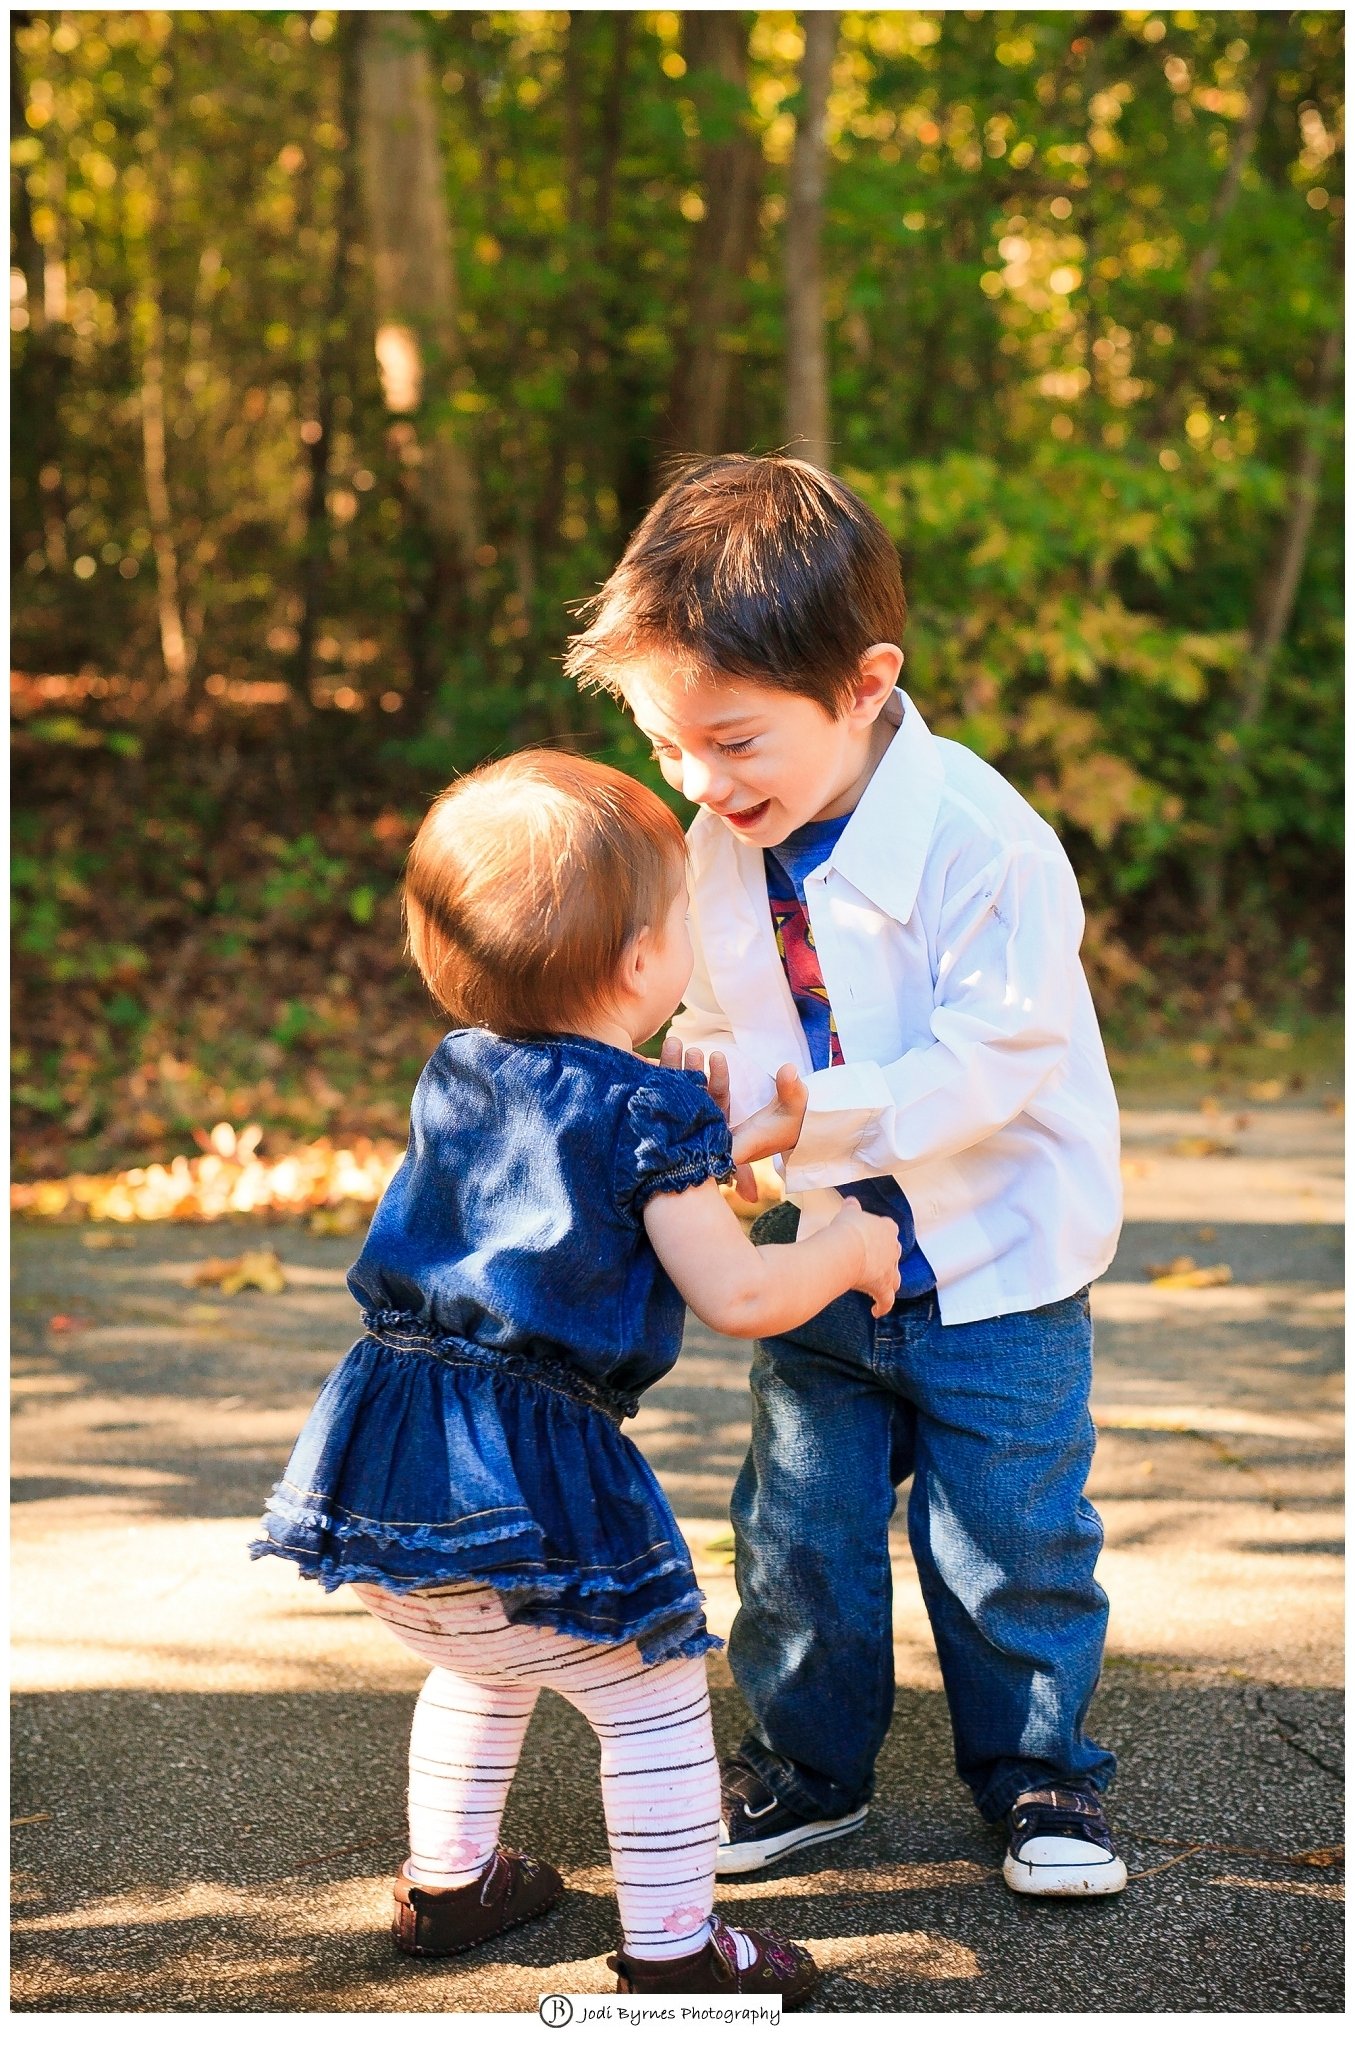 10 Amazing Brother And Sister Picture Ideas a sweet big brother greenville children photographer 2022